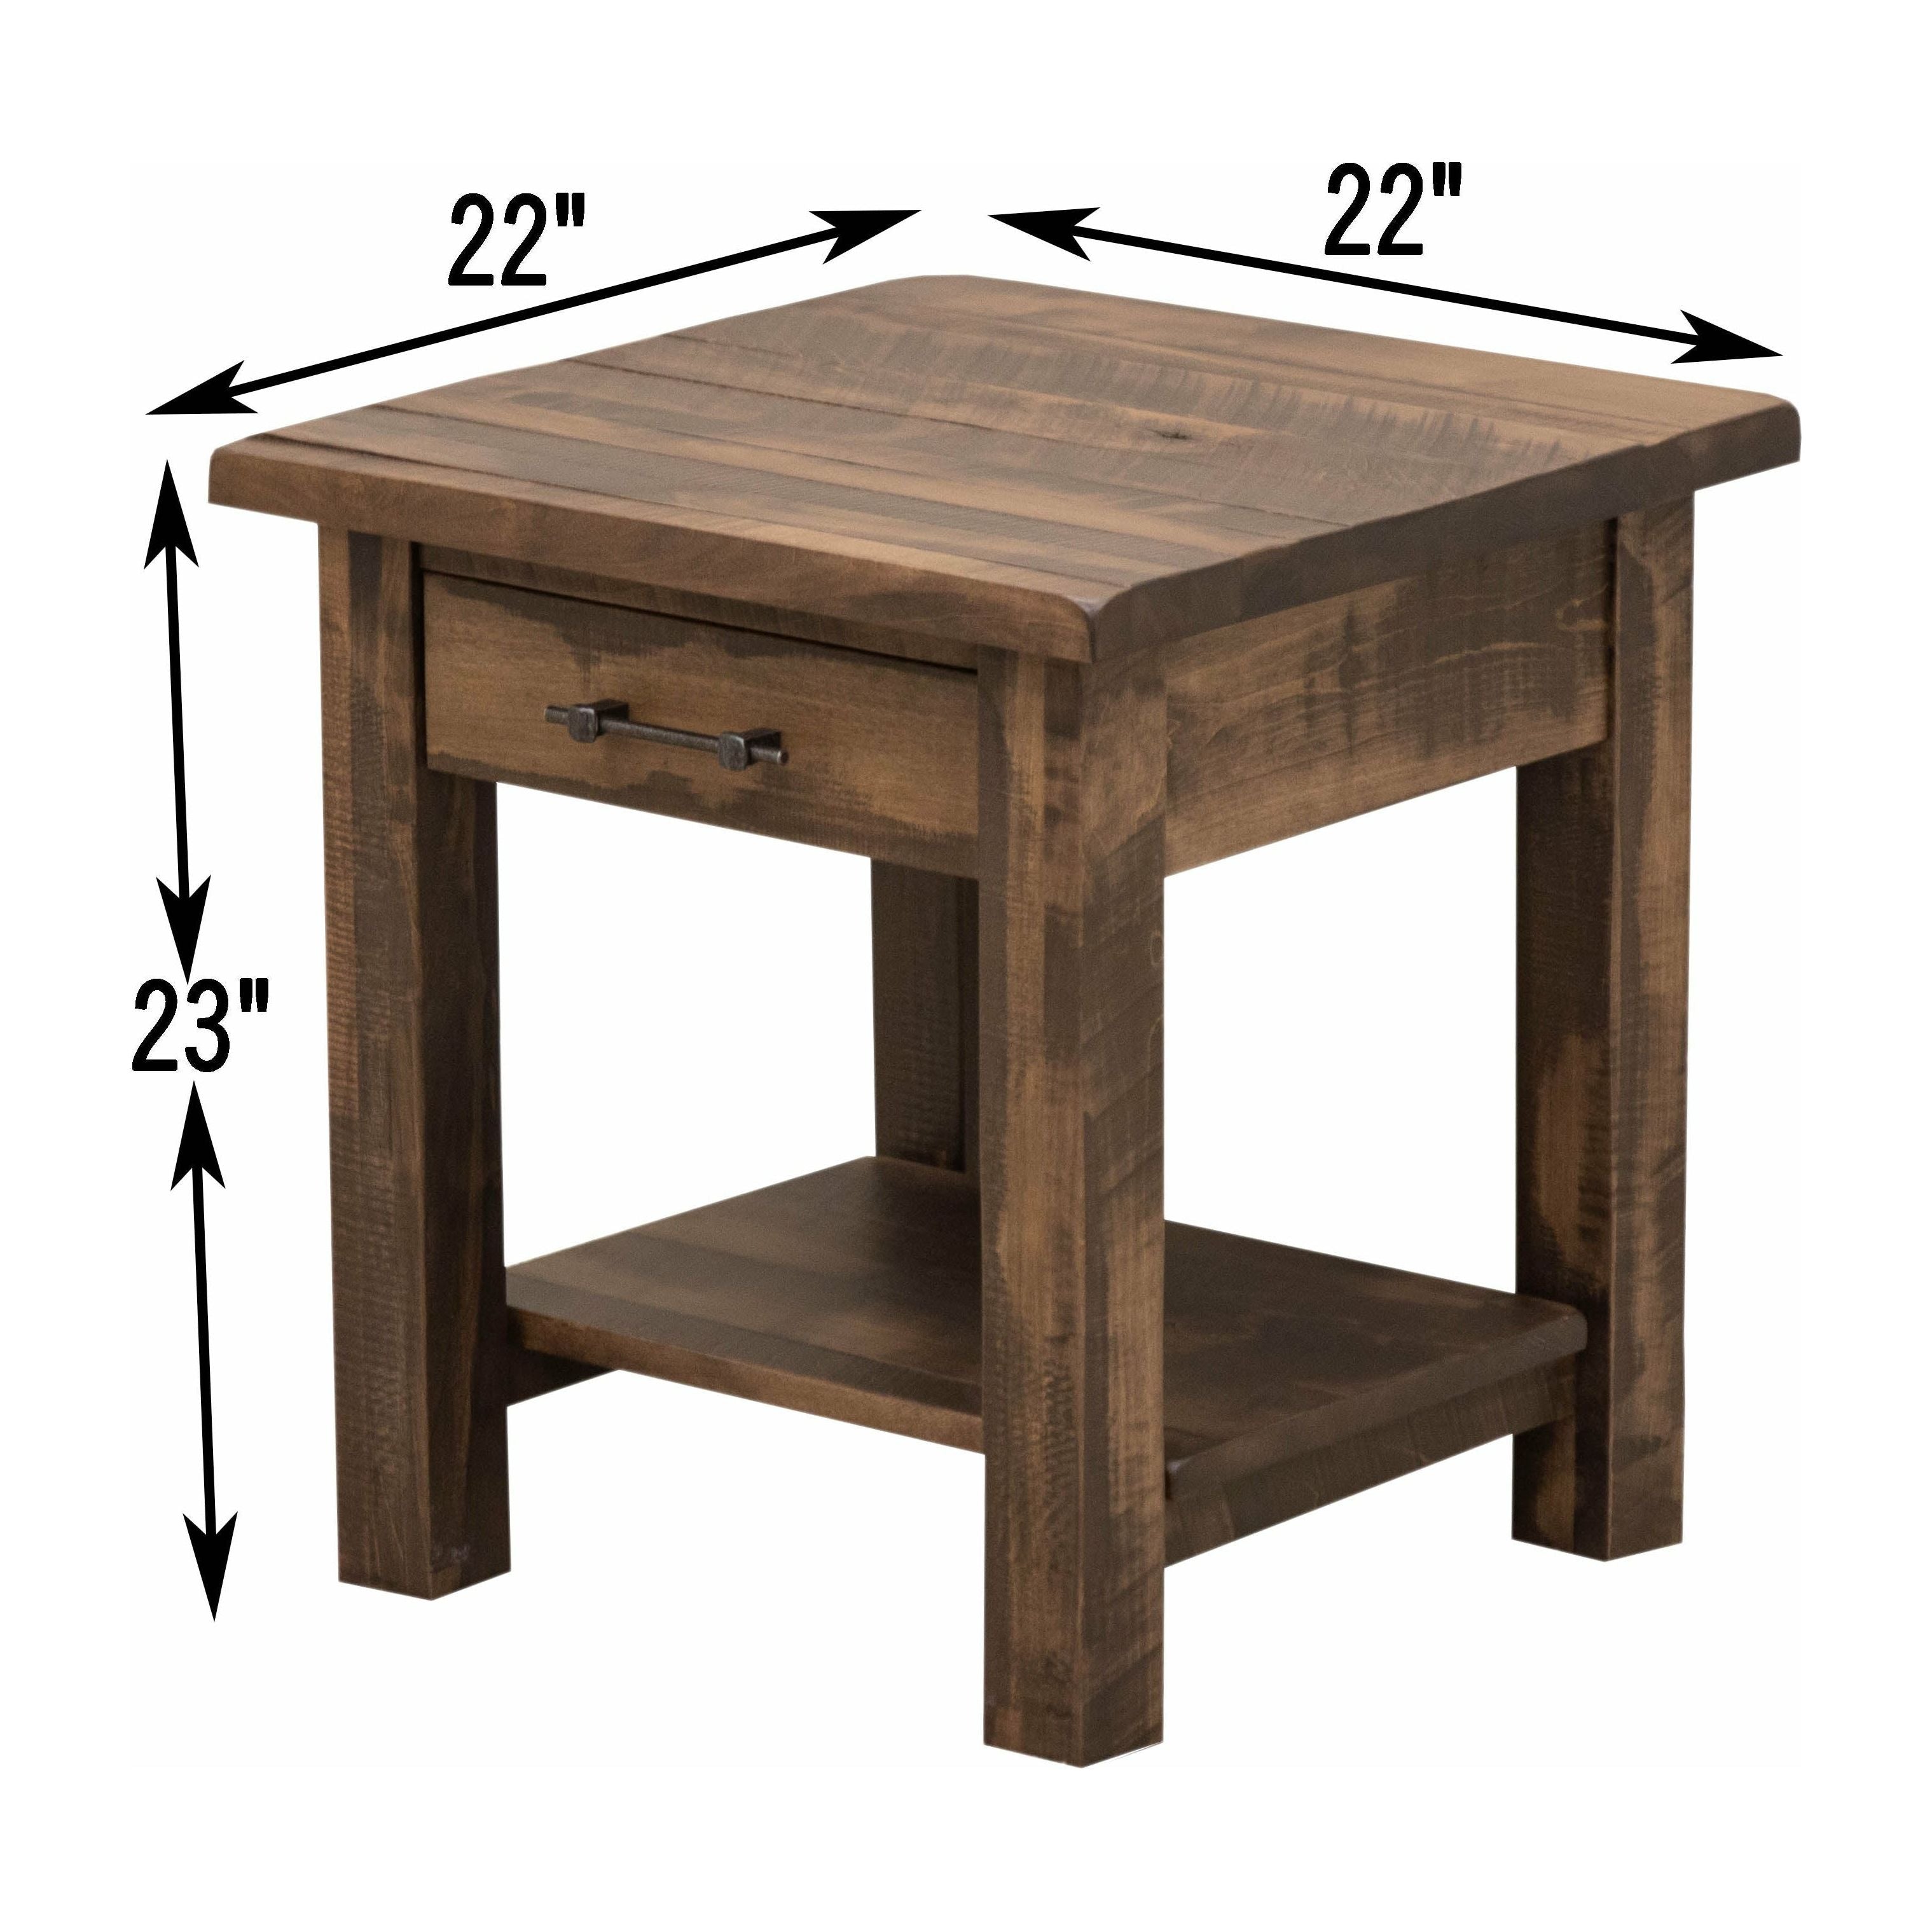 Milltown Large Square Open End Table